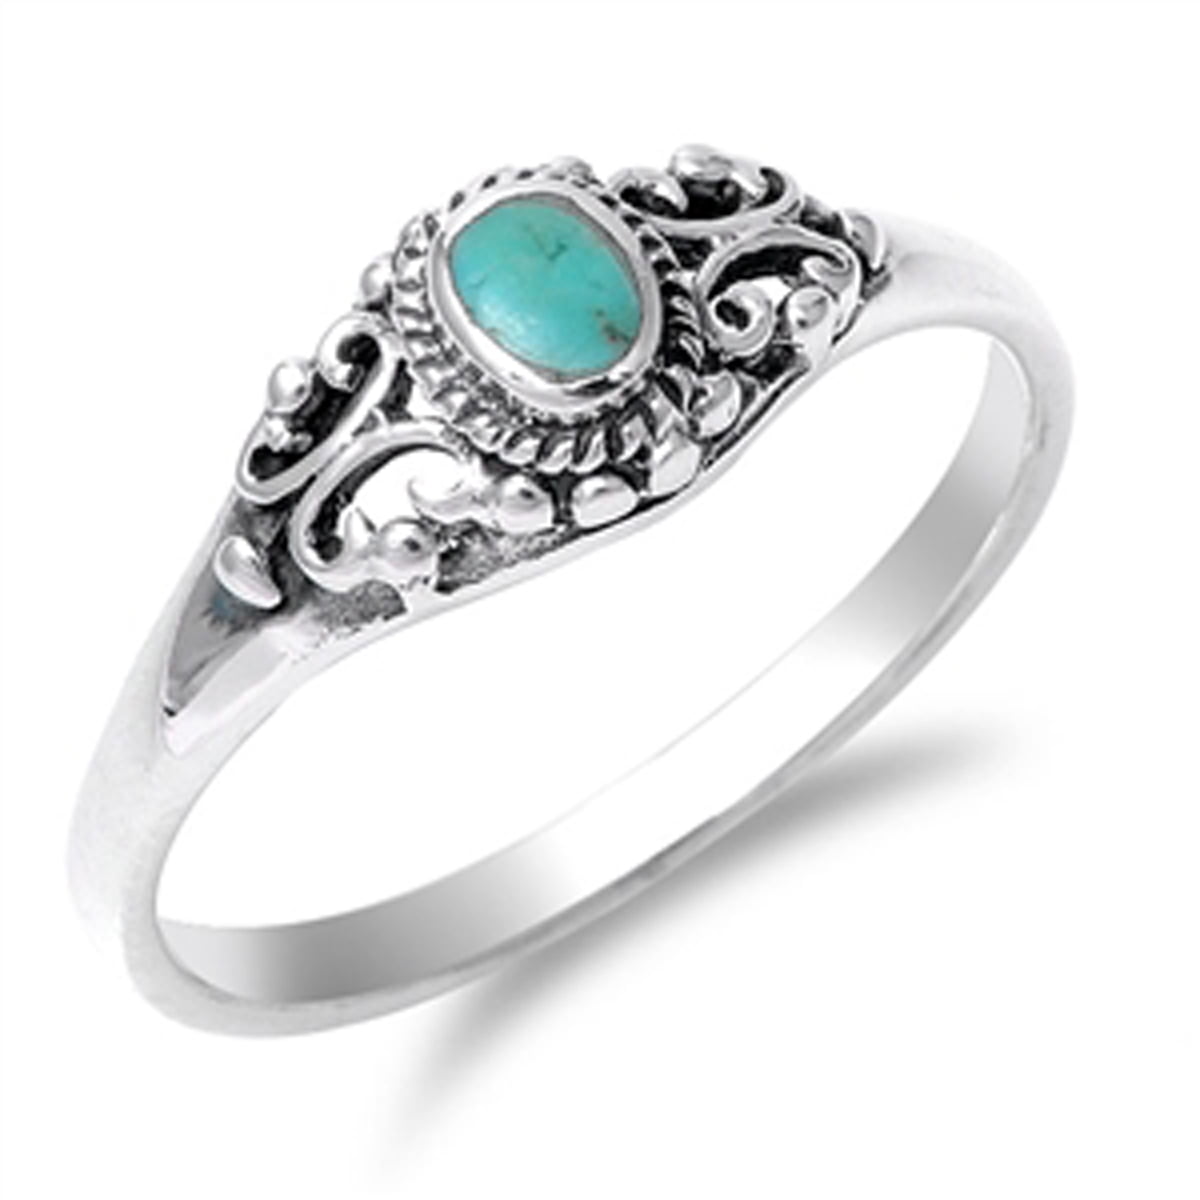 Sterling Silver and Turquoise Filigree Ring 